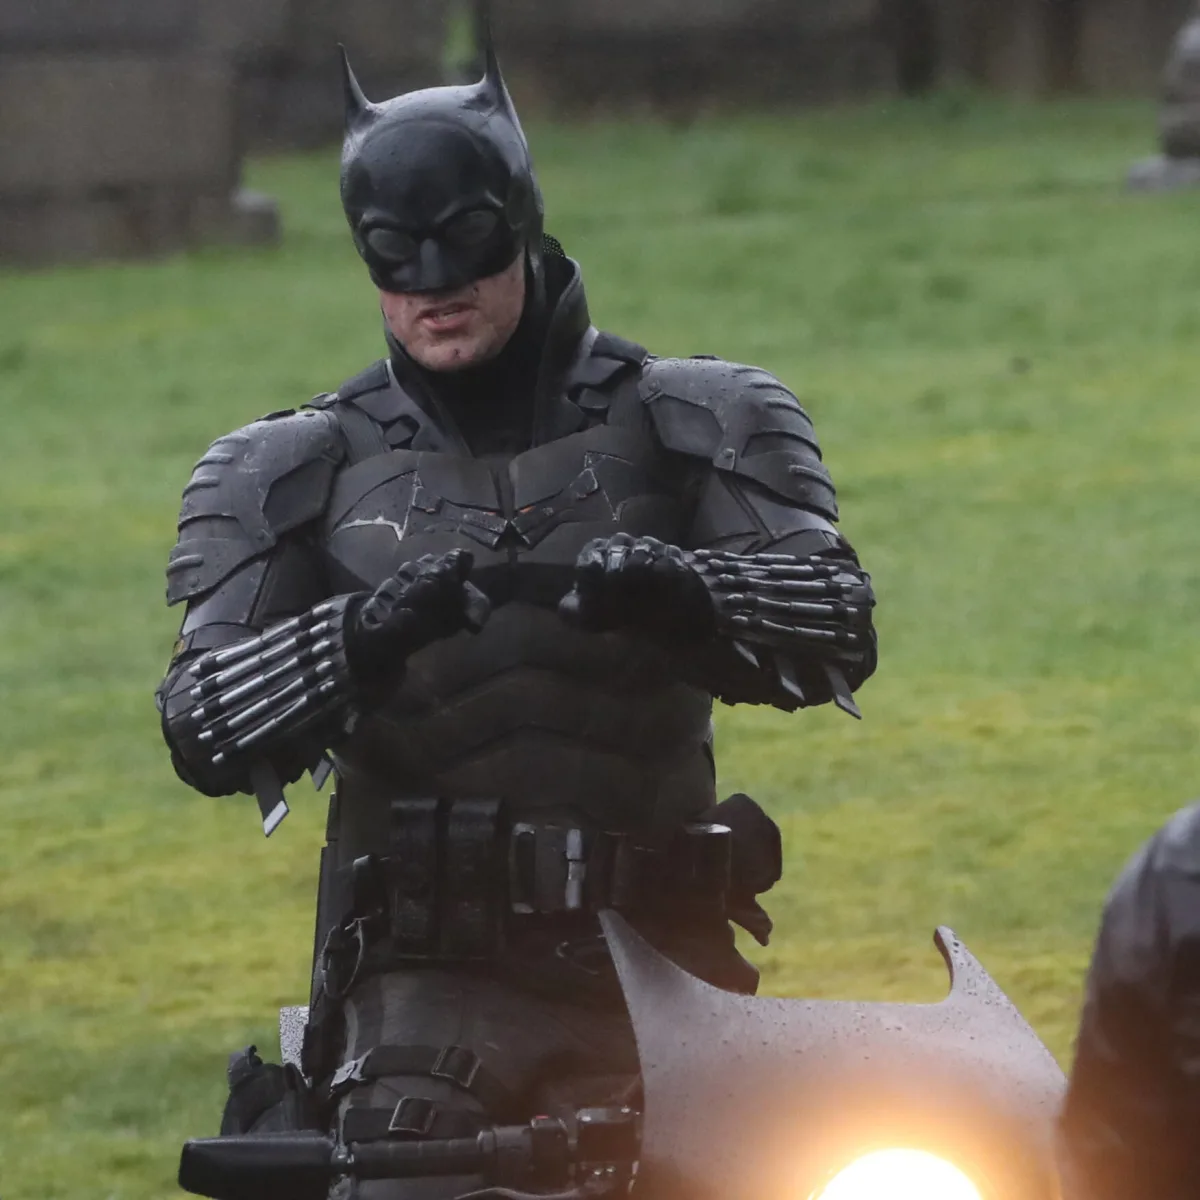 The Batman Robert Pattinson Suit And Batcycle Seen In New Photos